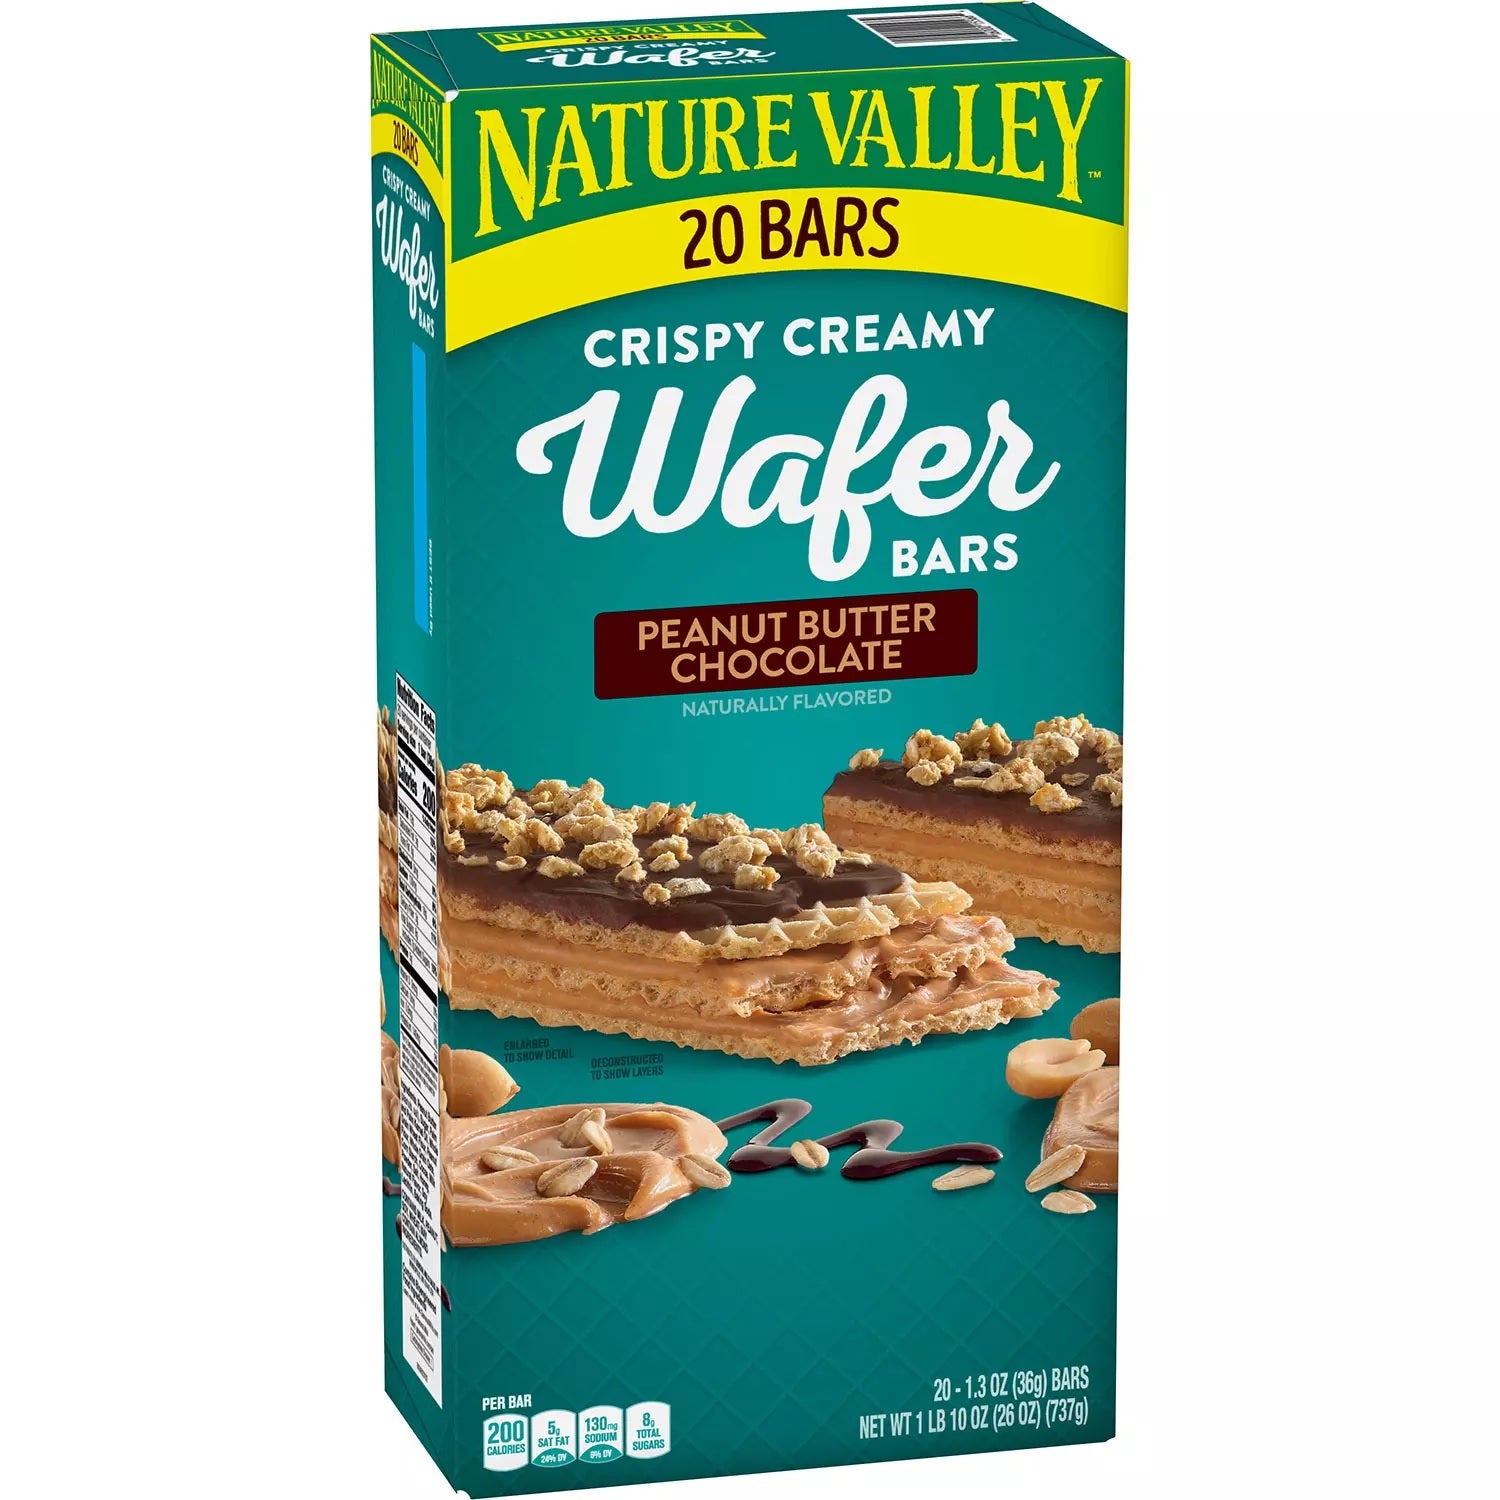 Nature Valley Peanut Butter Chocolate Wafer Bar - 20ct/1pk